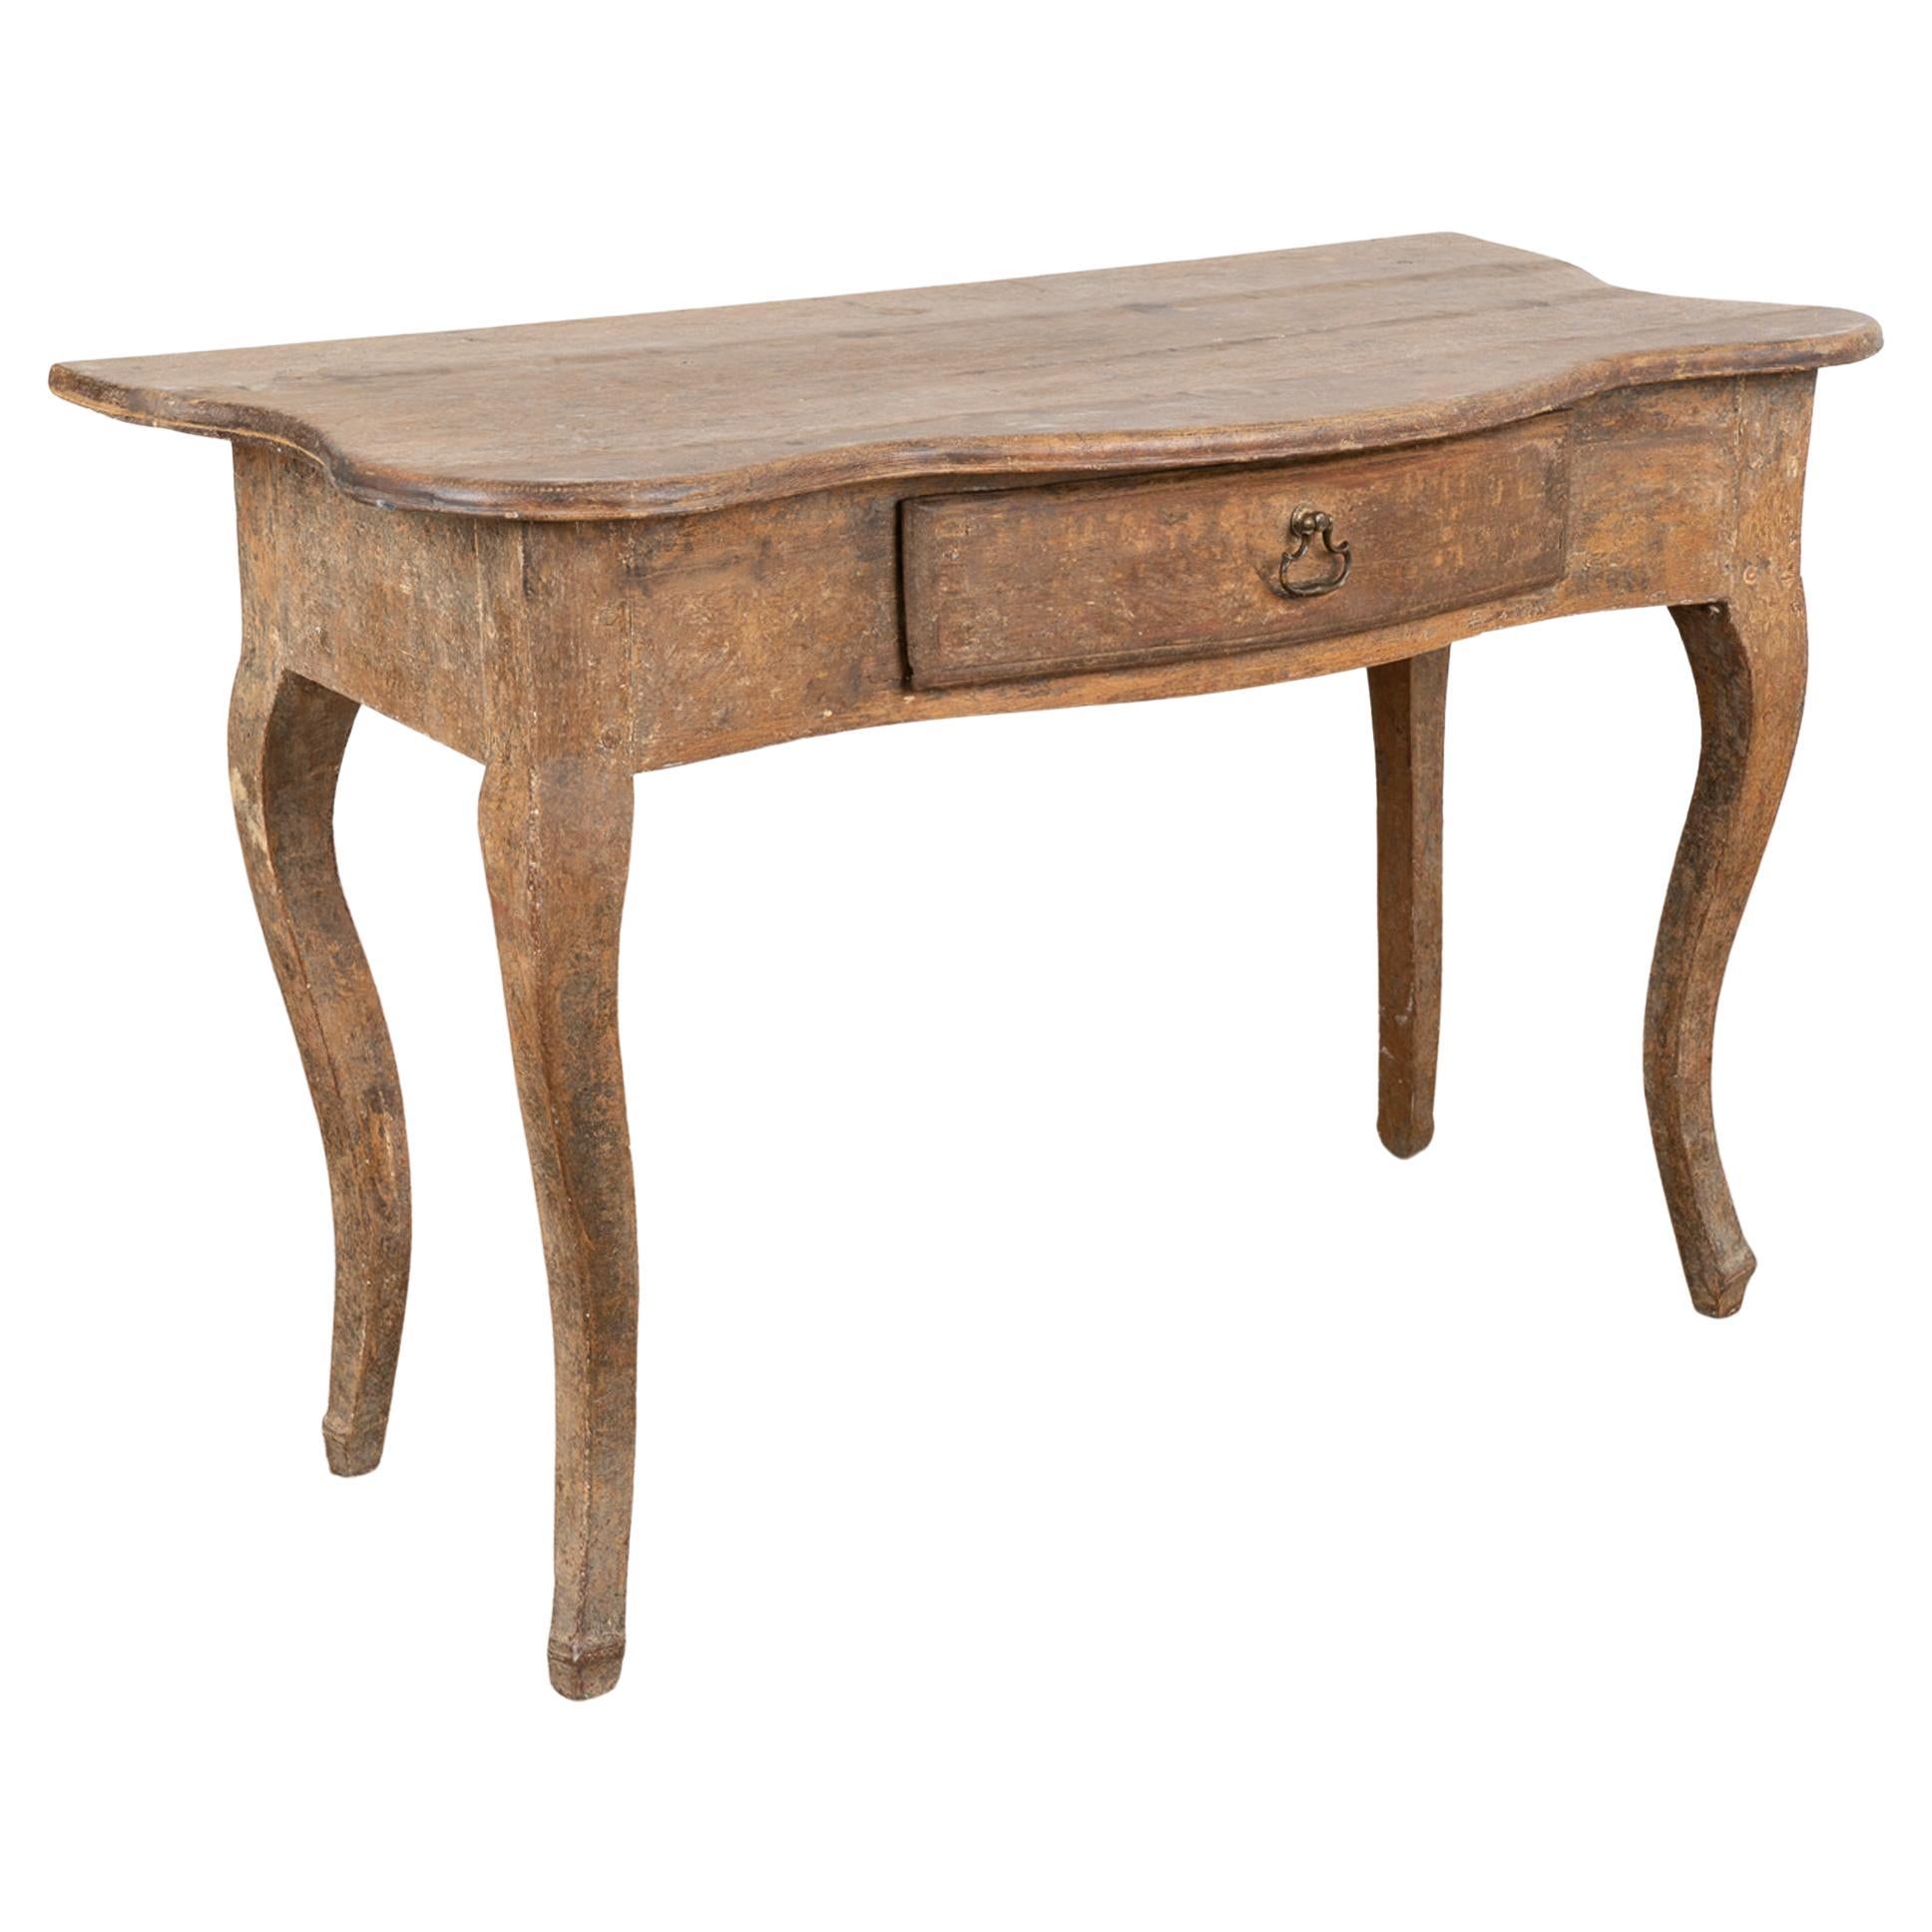 Antique Rococo Pine Side Table with Drawer, Sweden circa 1770-80 For Sale